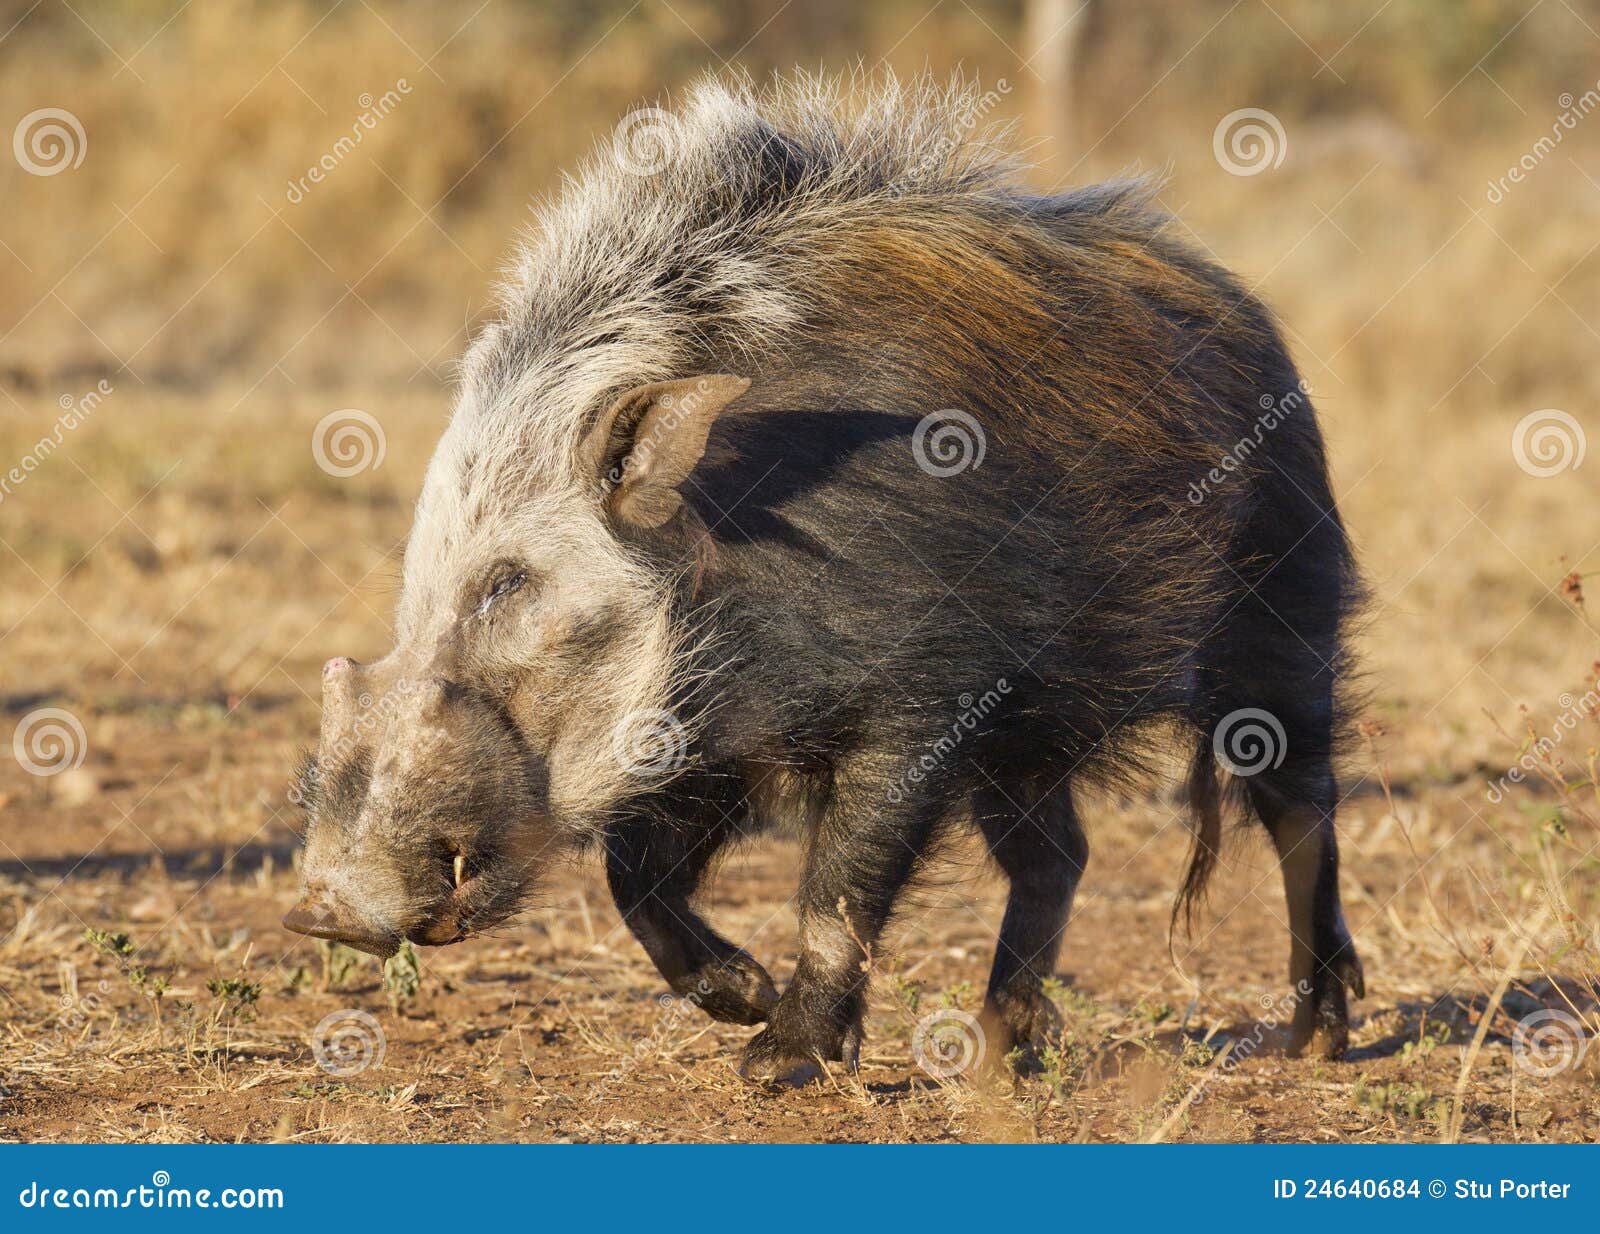 bushpig in daytime, south africa